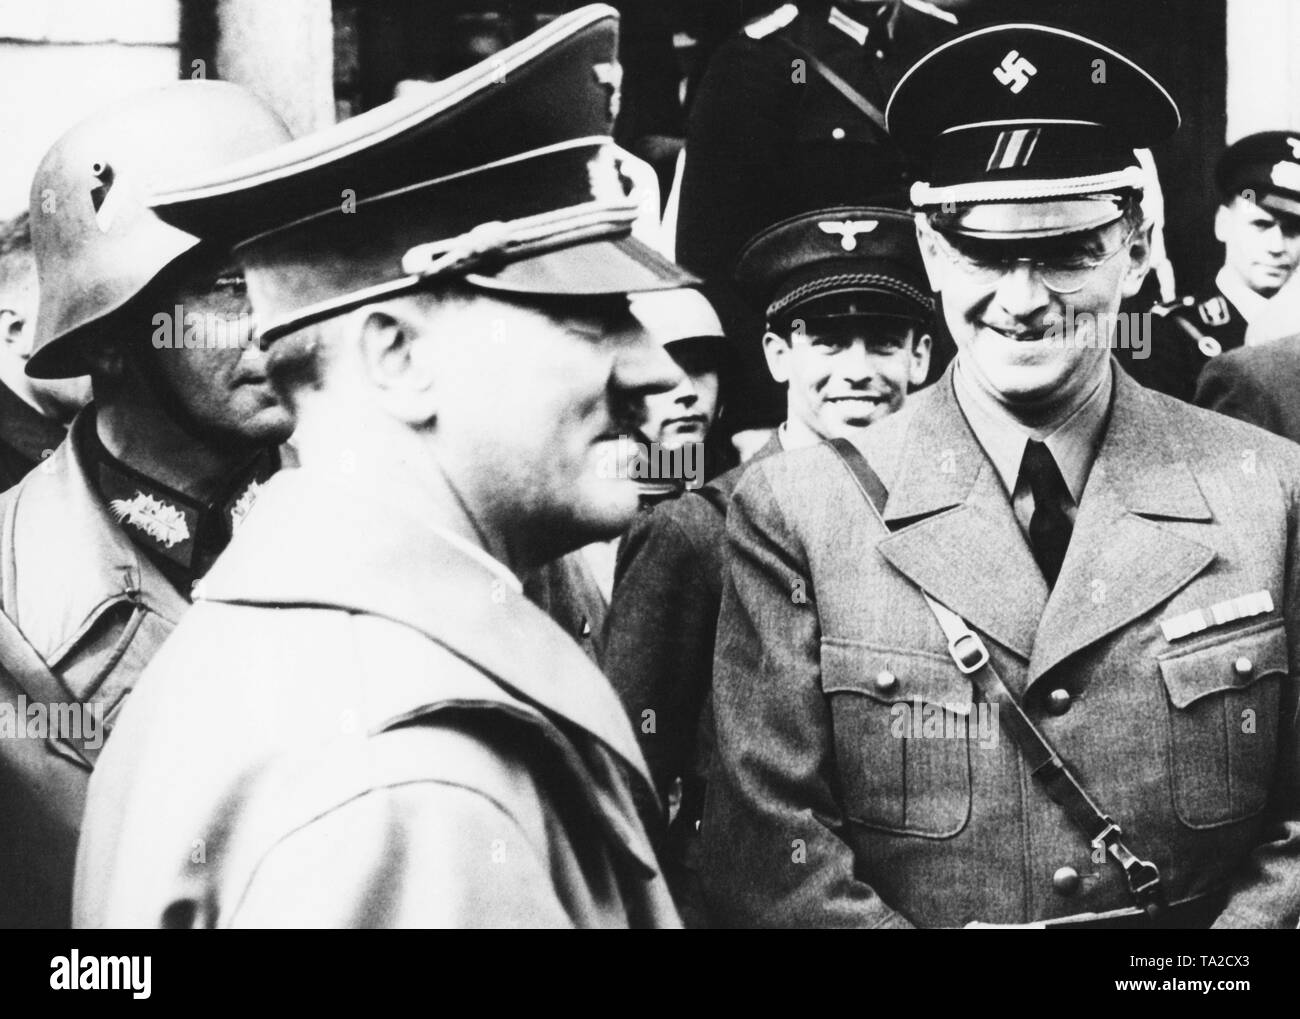 Gauleiter of the Sudetenland Konrad Henlein (right) with Adolf Hitler in the city of As on October 3, 1938, during the occupation of the Sudetenland. On the left, General Walter von Reichenau, Commander of the deployed troops. Stock Photo